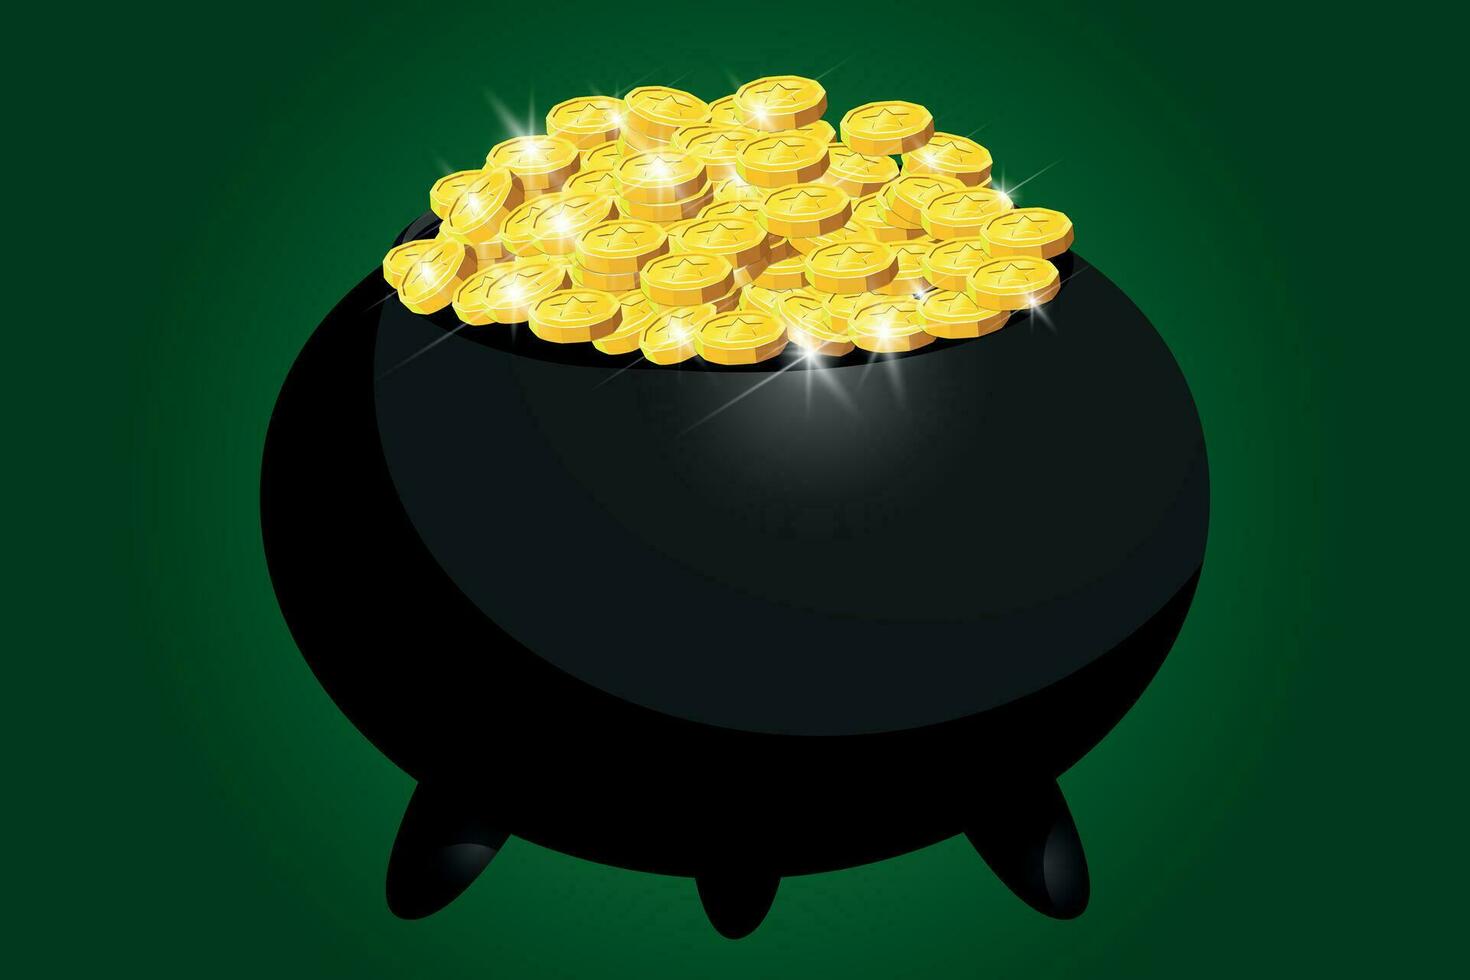 Leprechaun gold. Leprechaun Pot of Gold and Luck, traditional symbol of the Irish holiday of St. Patrick's Day. Vector illustration isolated on green background.